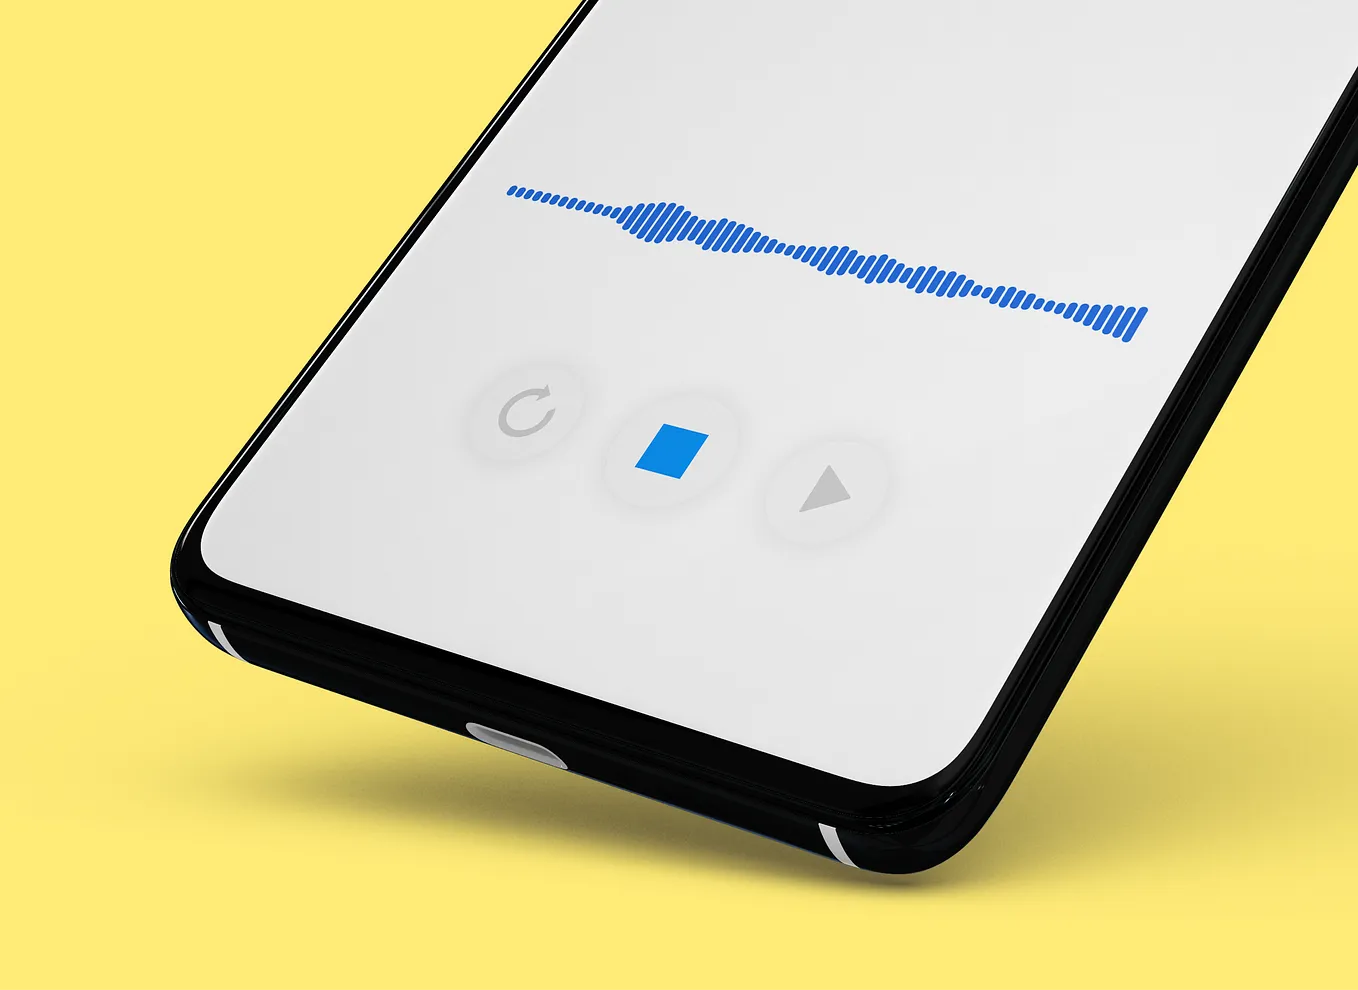 AudioRecordView or “Simplest and best audio visualizer for android”